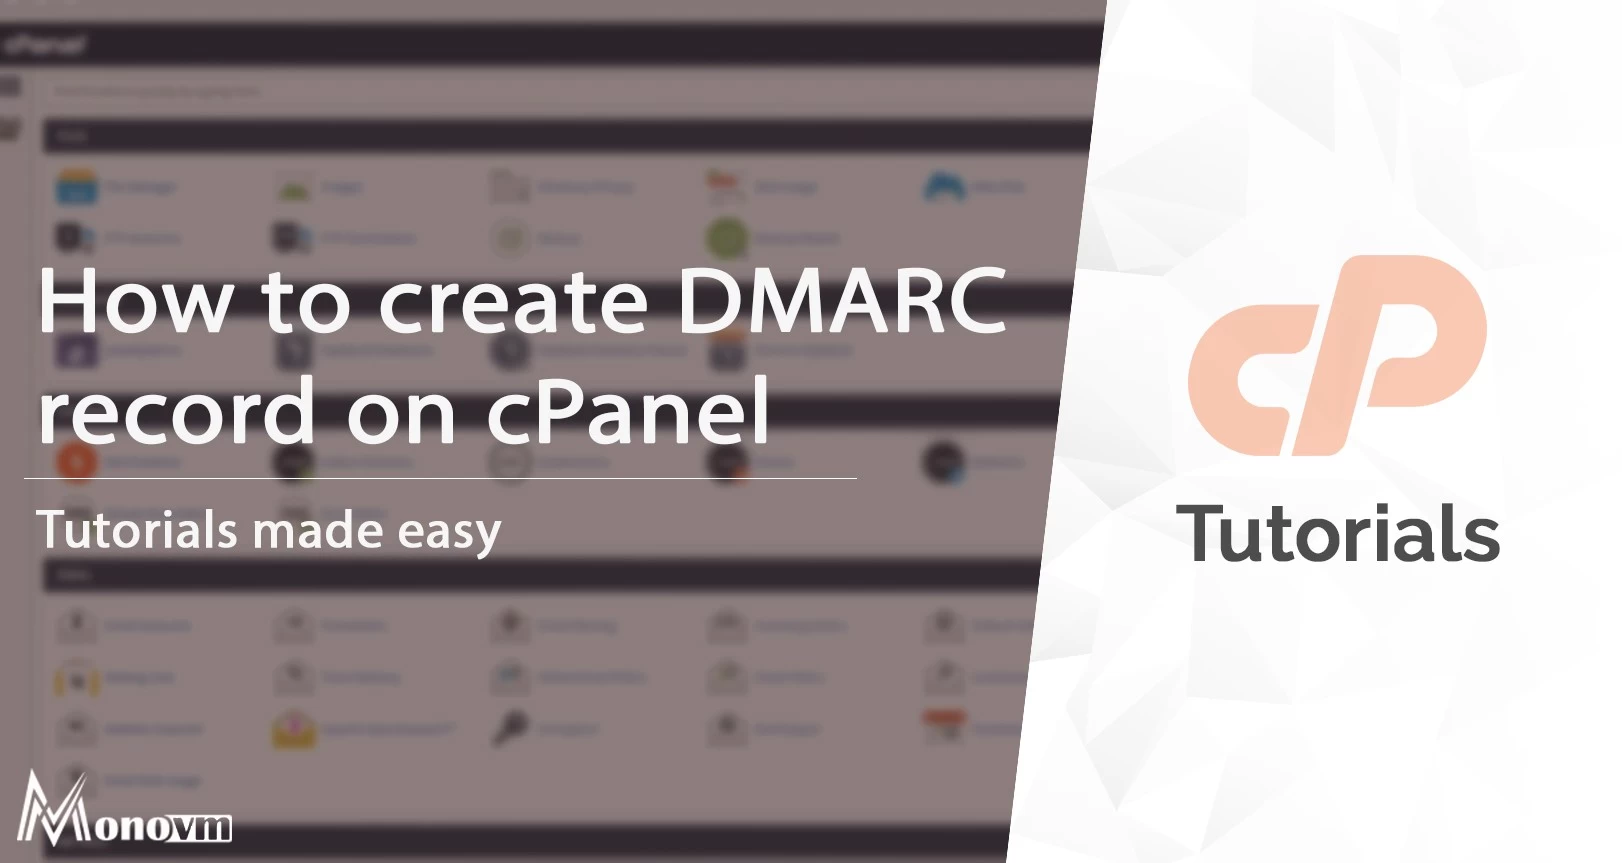 How to create DMARC record on cPanel?